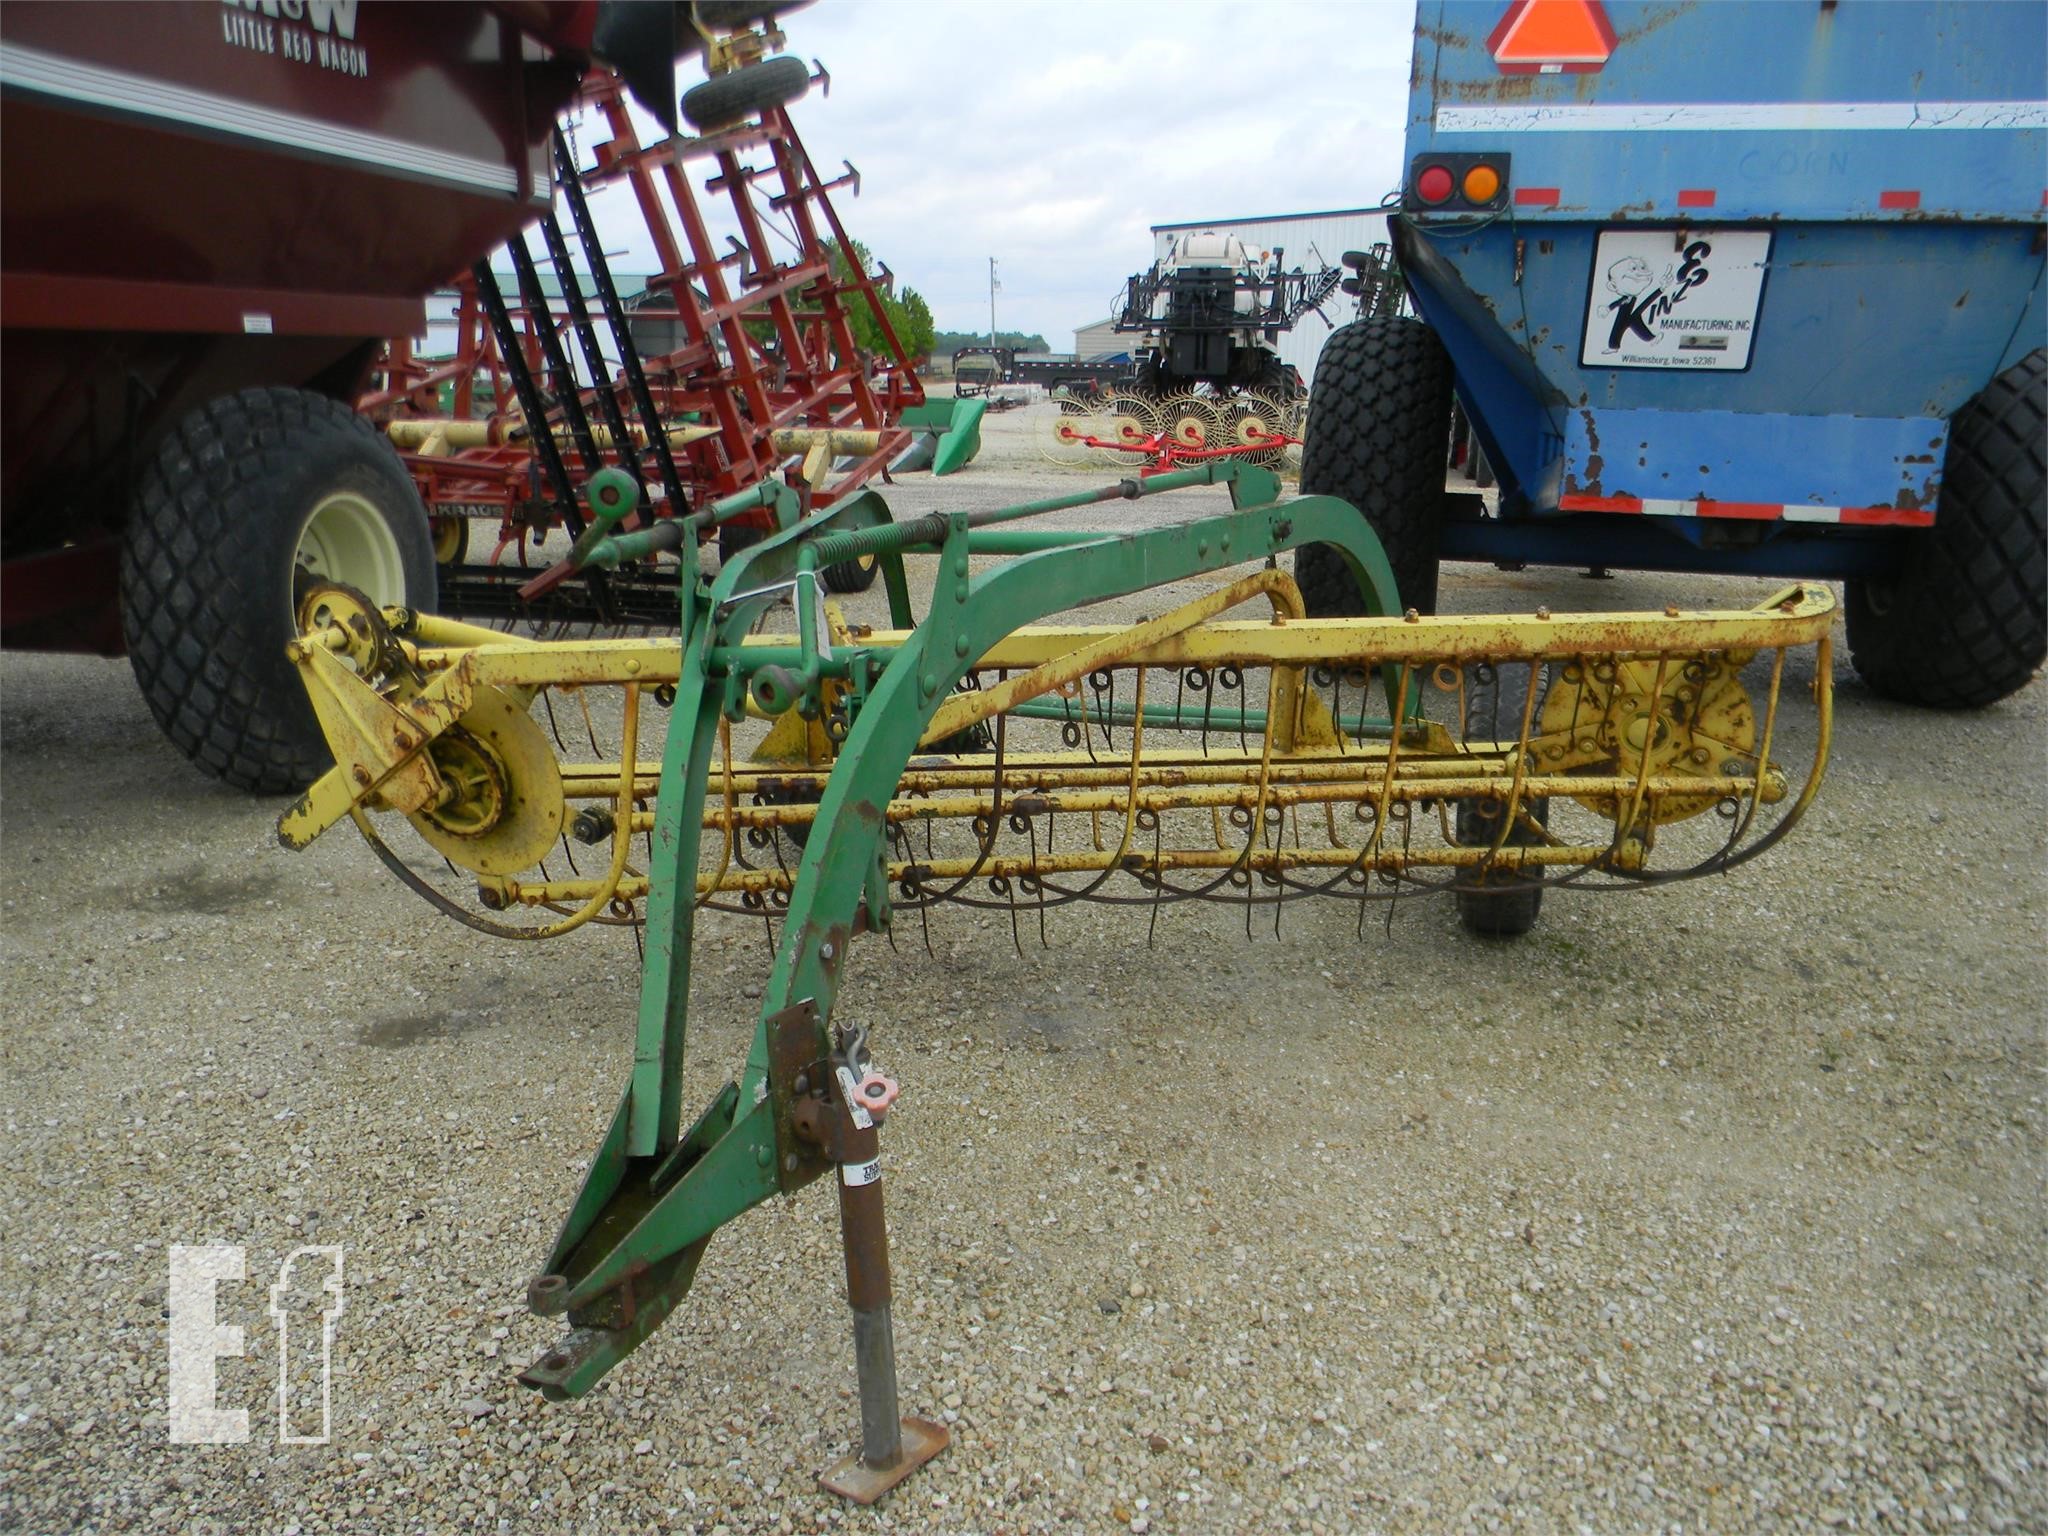 EquipmentFacts.com | OLIVER Hay Rake Online Auctions